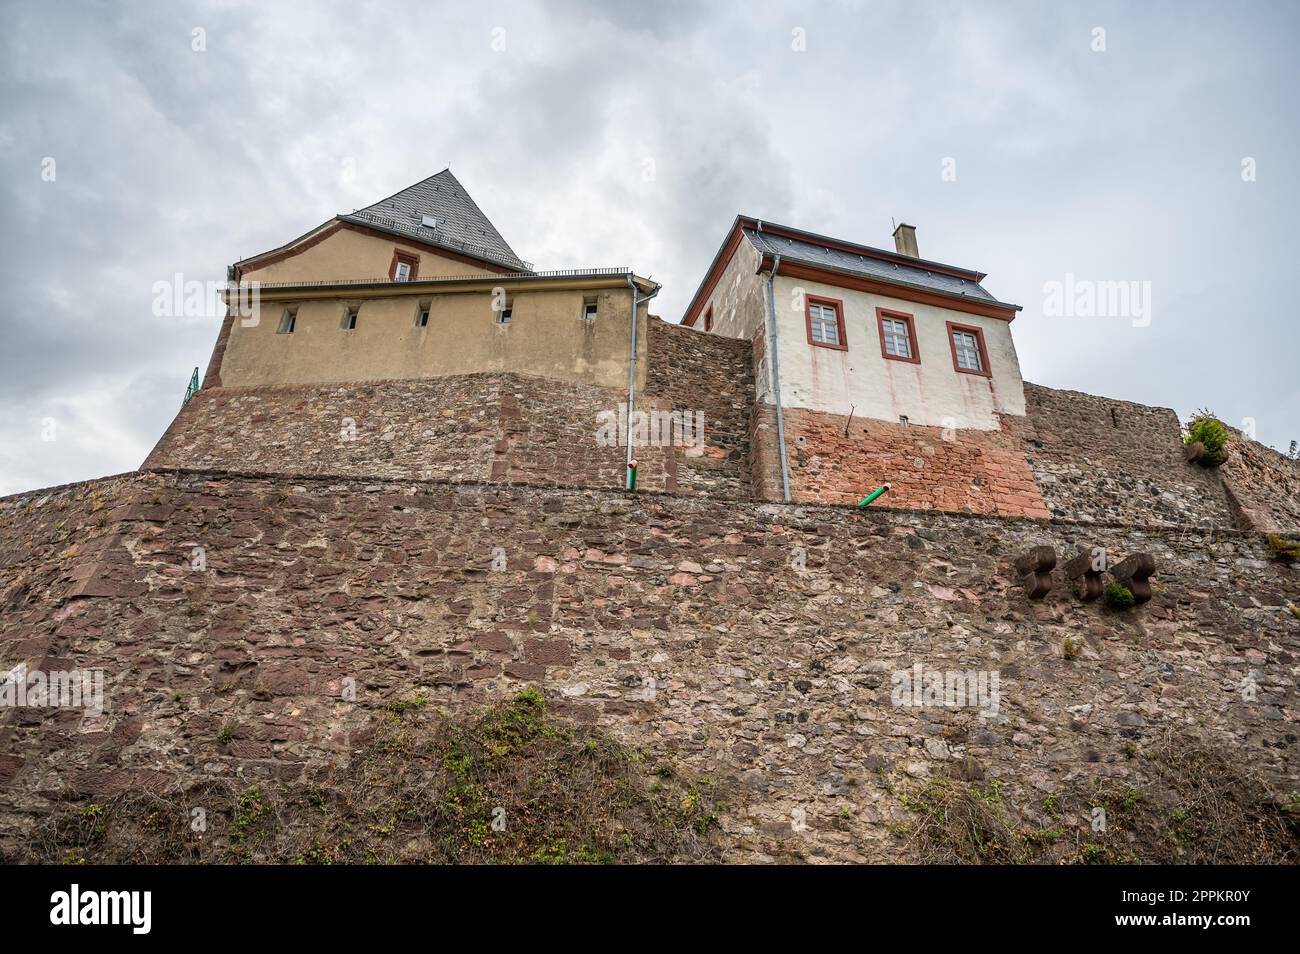 Castle Veste Otzberg, odenwald, view from low angle with old wall in front, cloudy day, germany Stock Photo